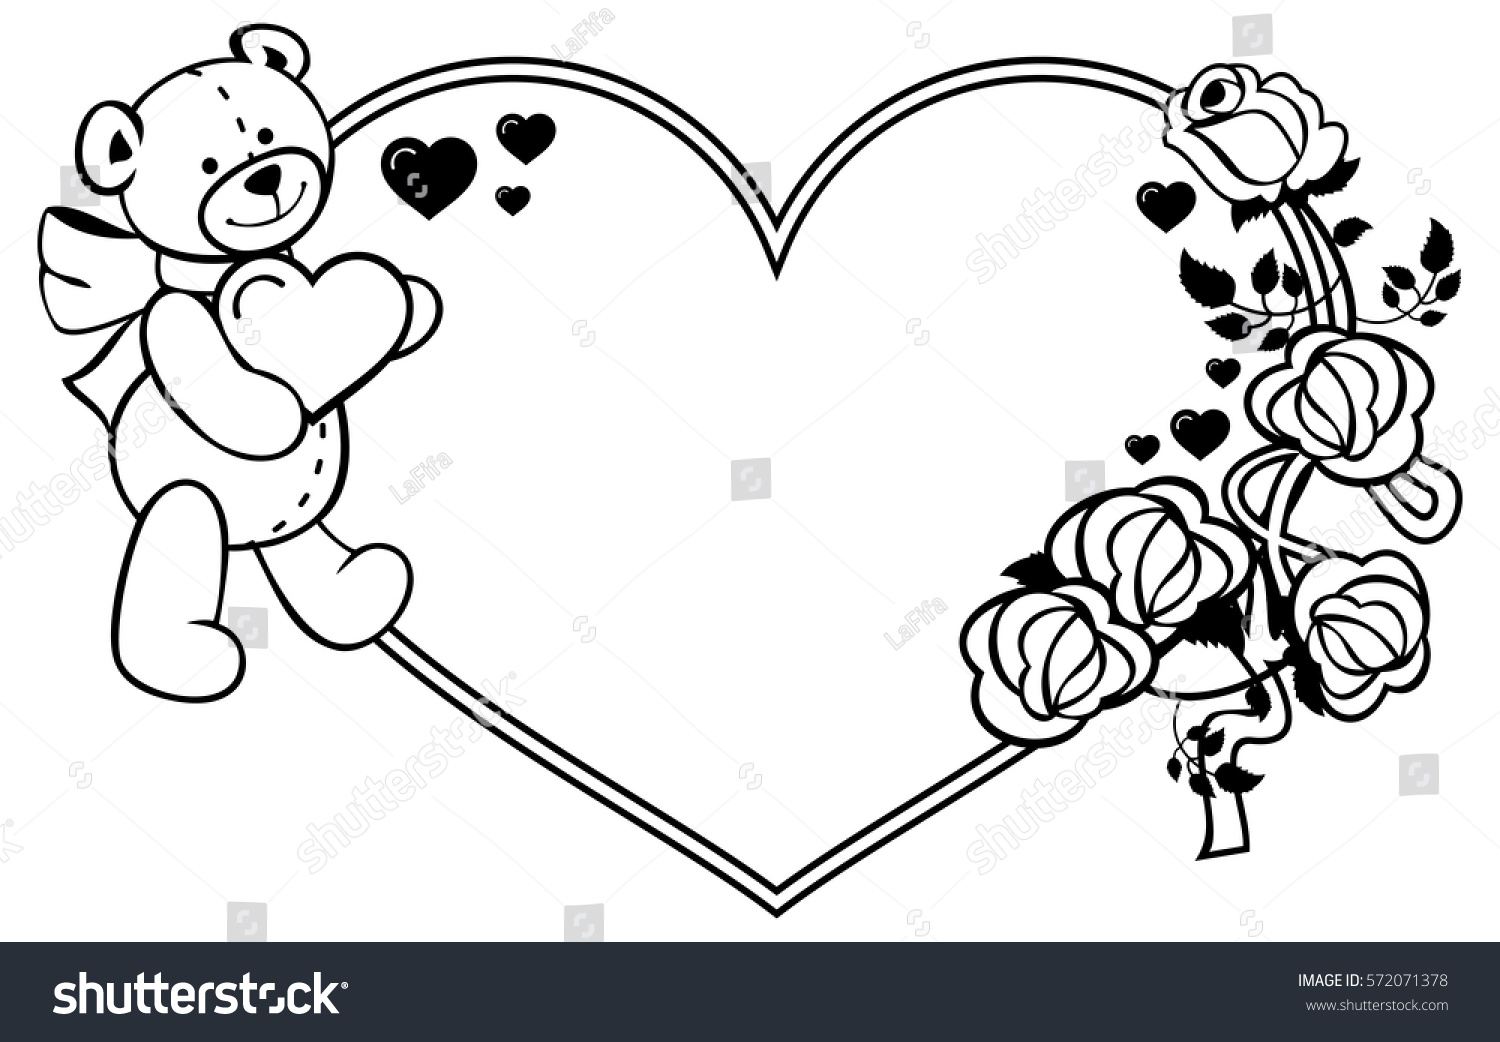 Heart shaped frame with outline roses teddy bear holding heart Valentine Day background